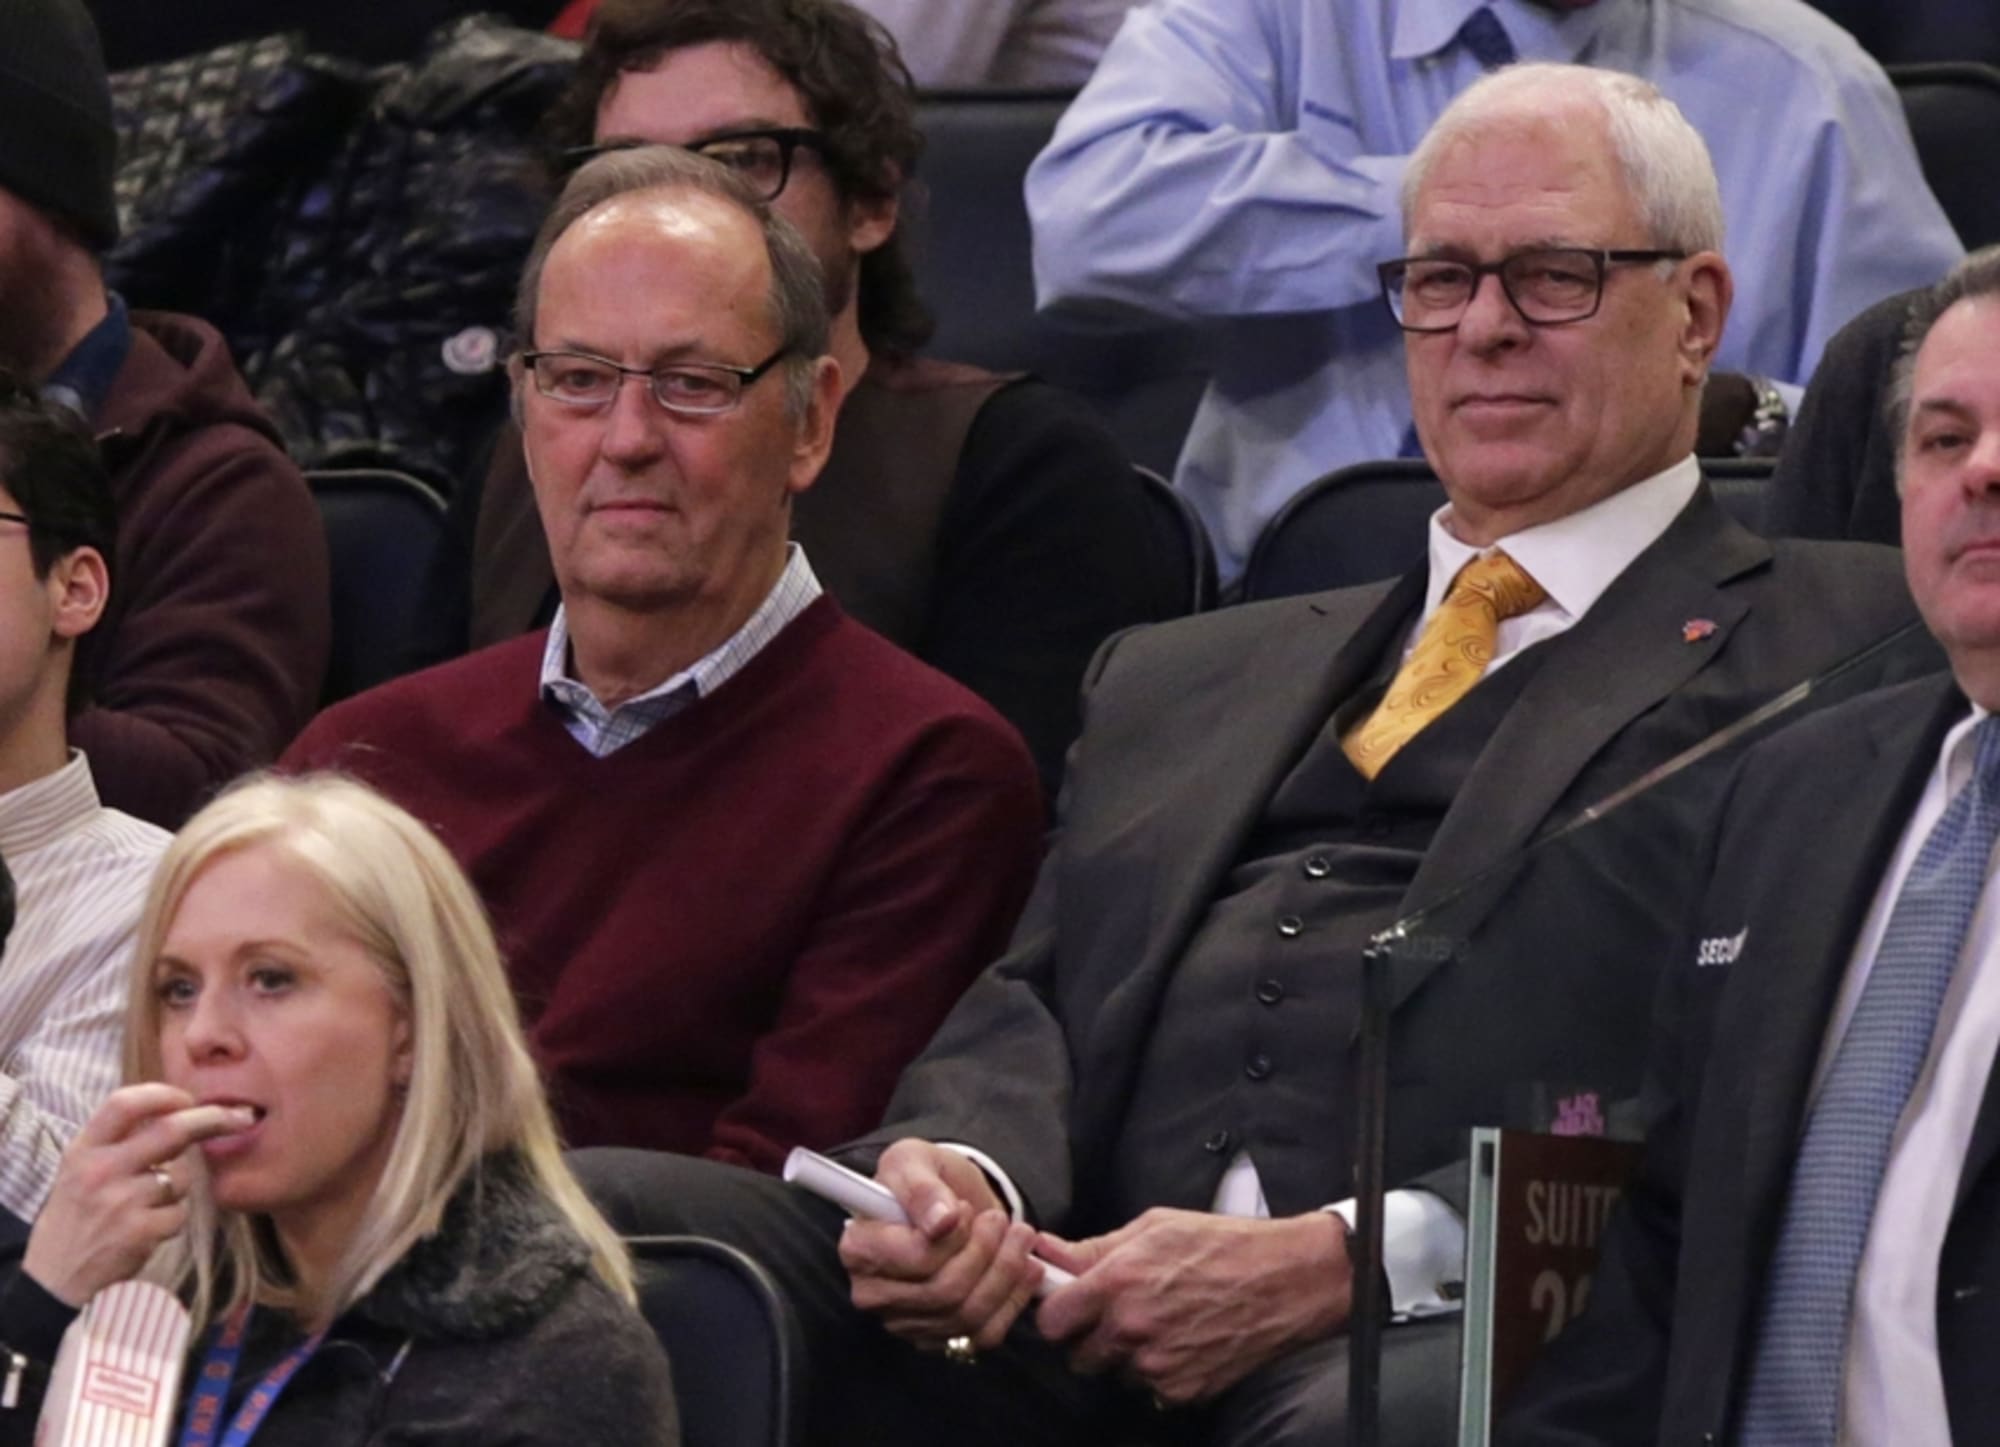 Who is Phil Jackson? Fast facts on the head coach of the Chicago